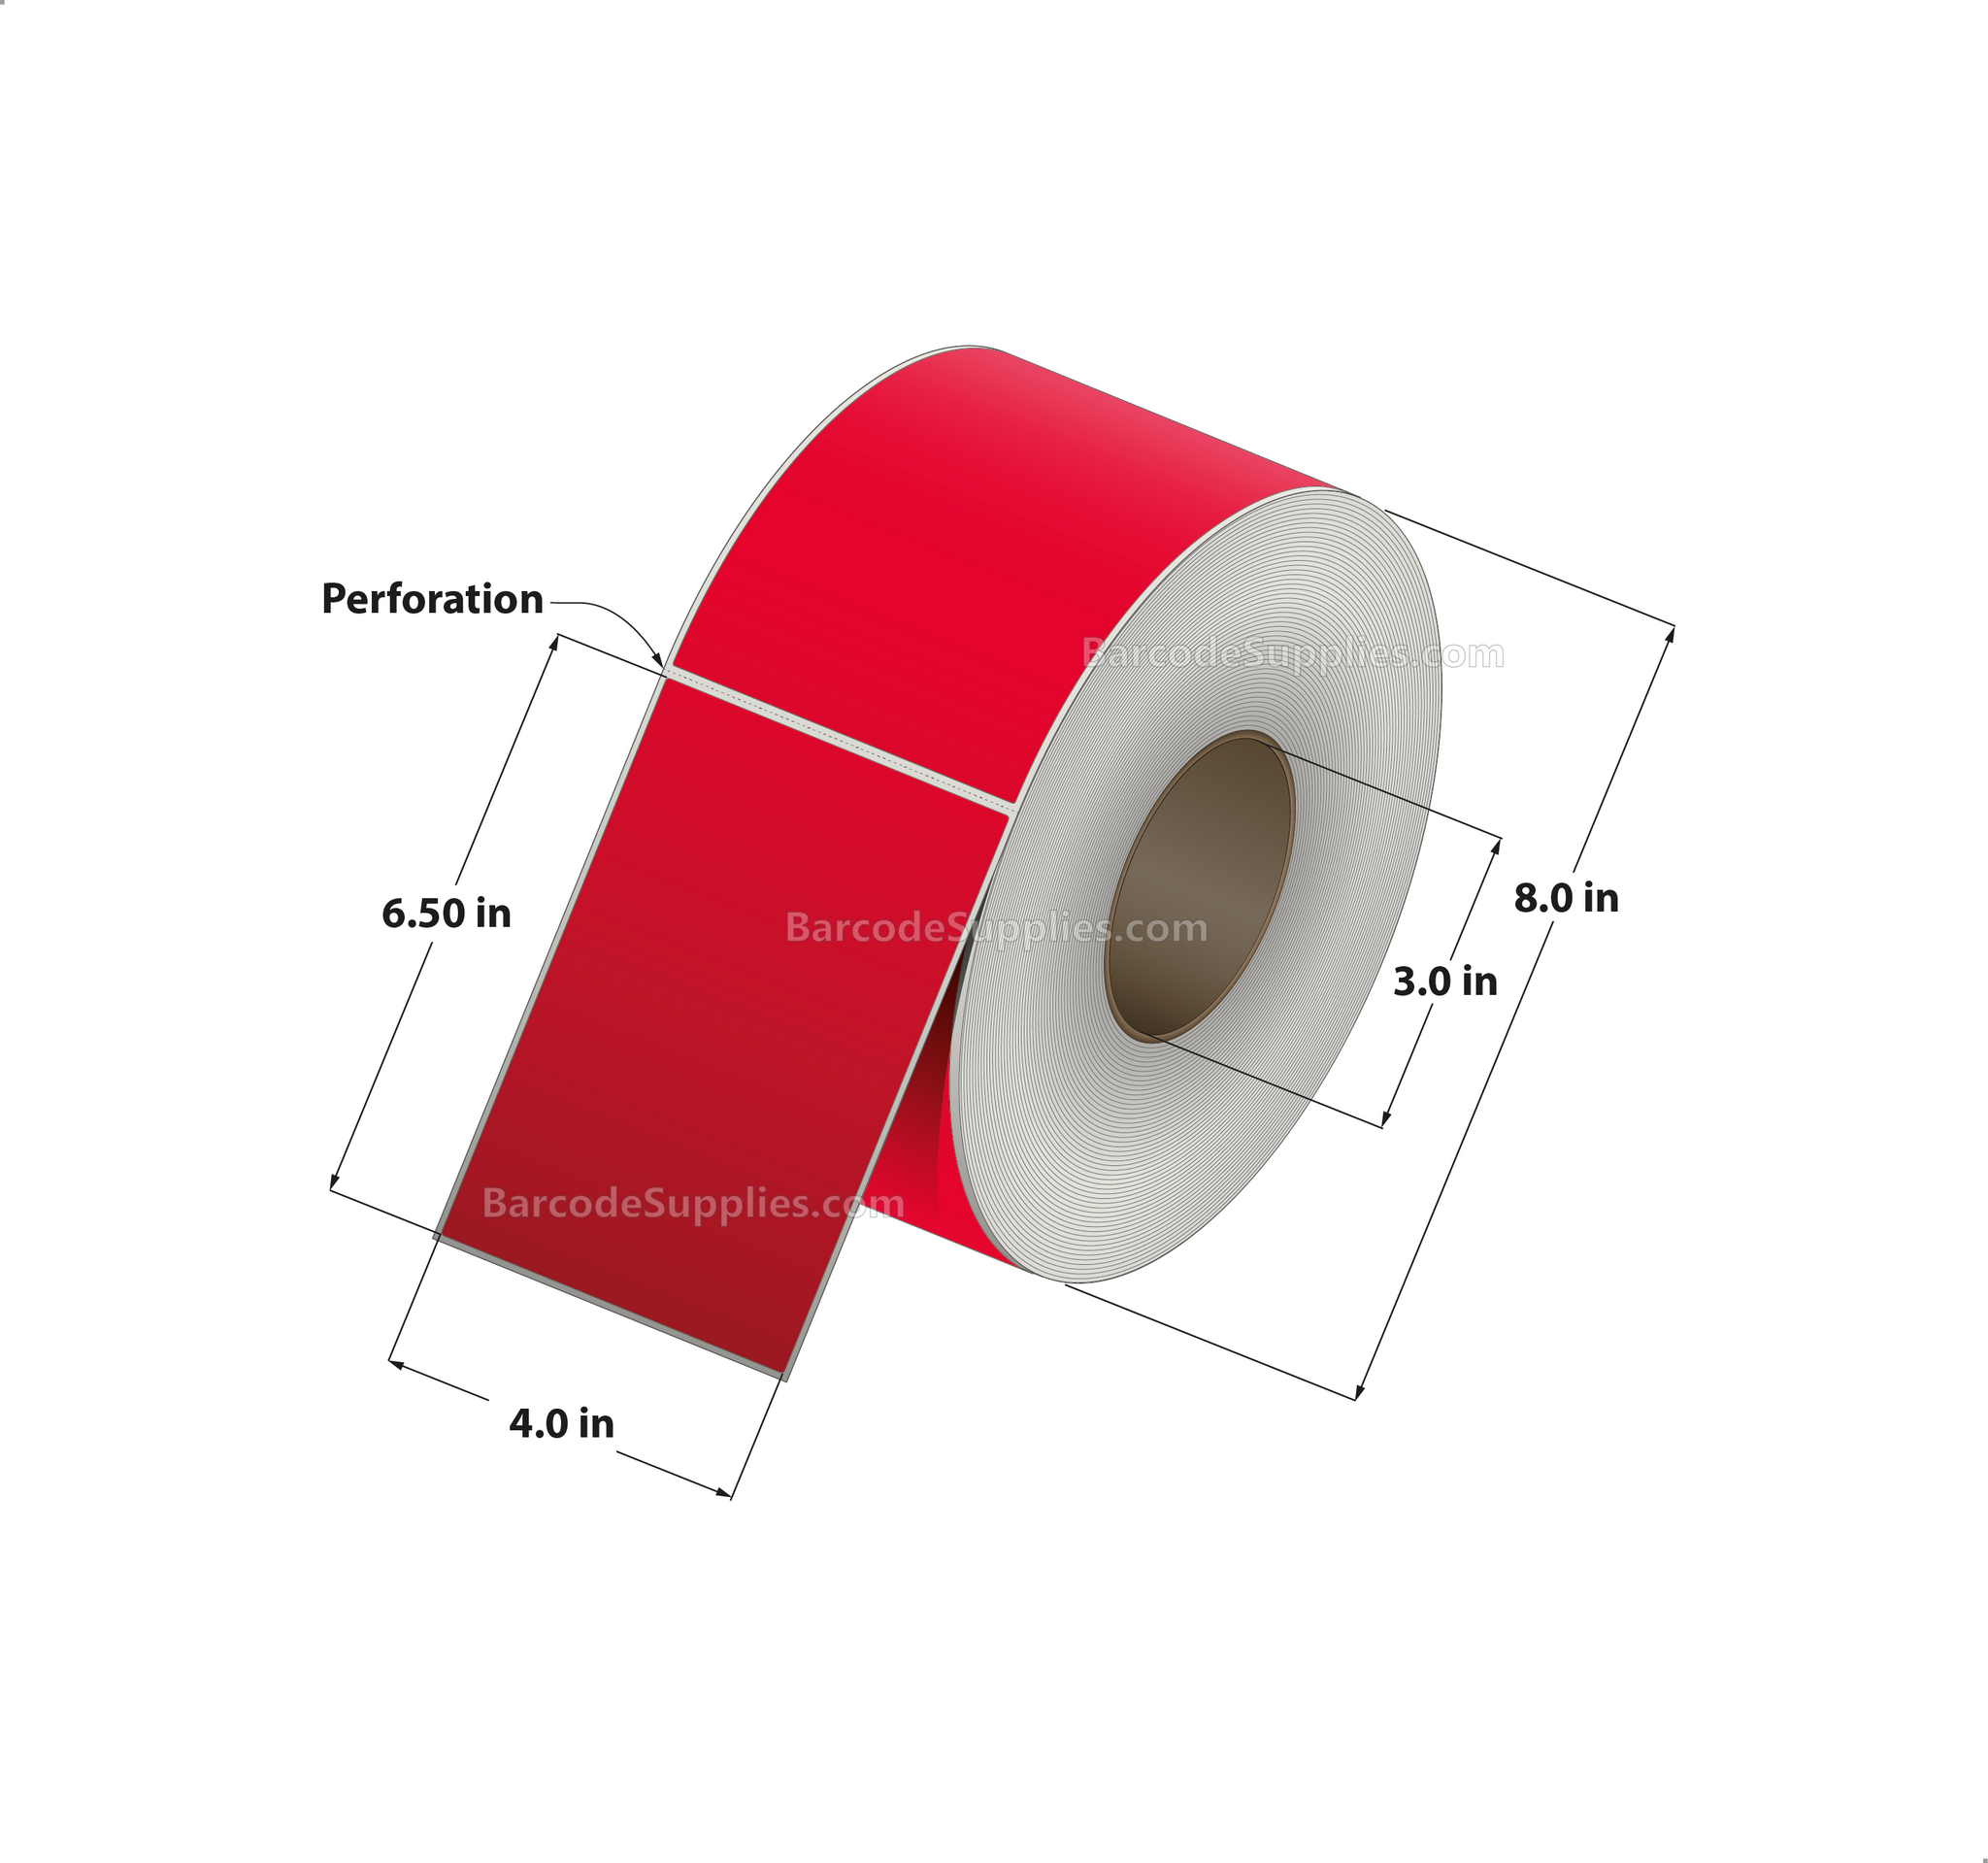 4 x 6.5 Thermal Transfer 032 Red Labels With Permanent Adhesive - Perforated - 900 Labels Per Roll - Carton Of 4 Rolls - 3600 Labels Total - MPN: RFC-4-65-900-RD